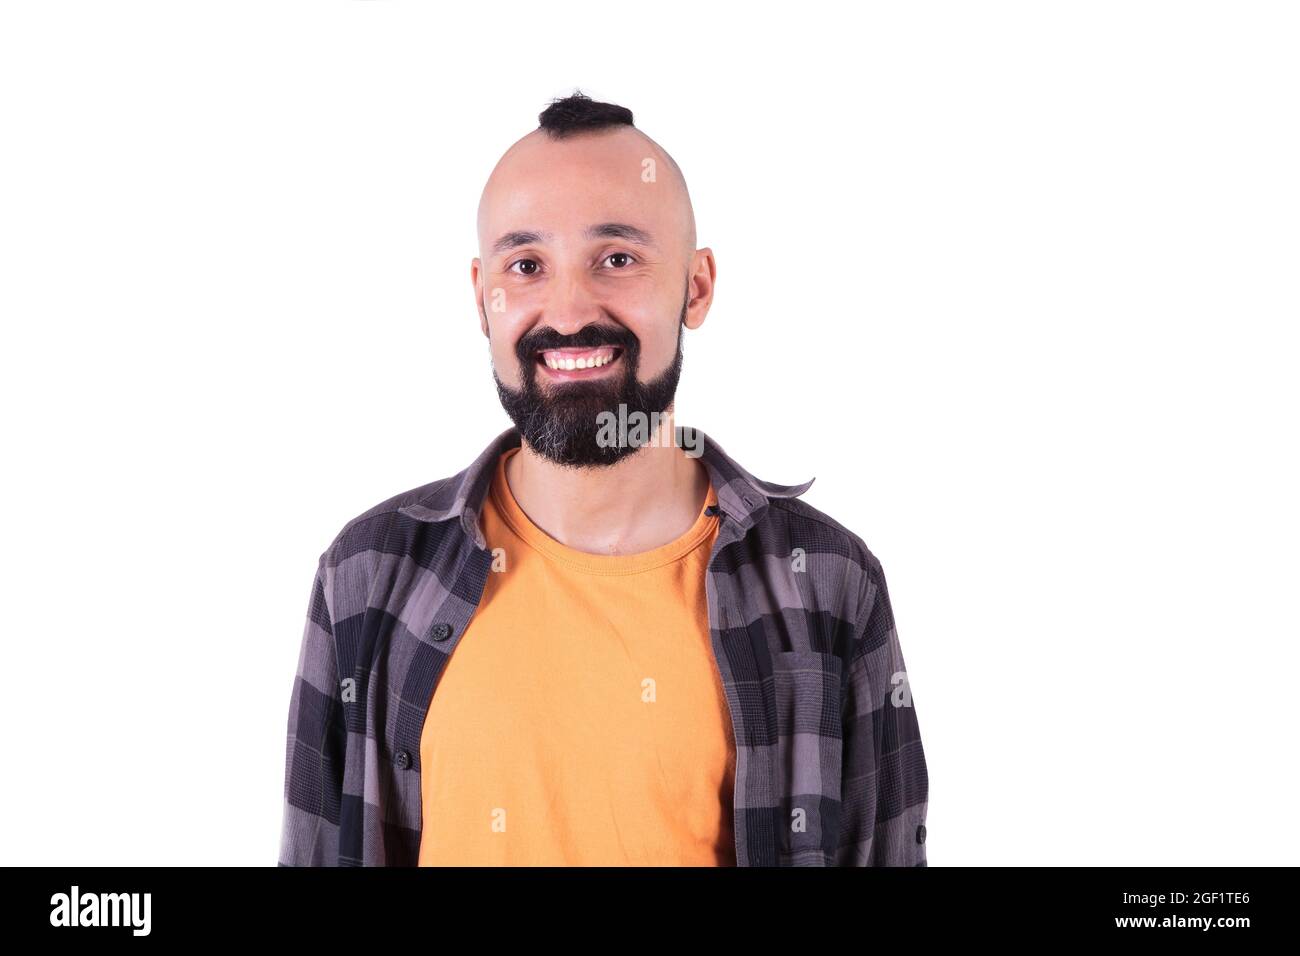 Happy young man grinning and looking at camera Stock Photo